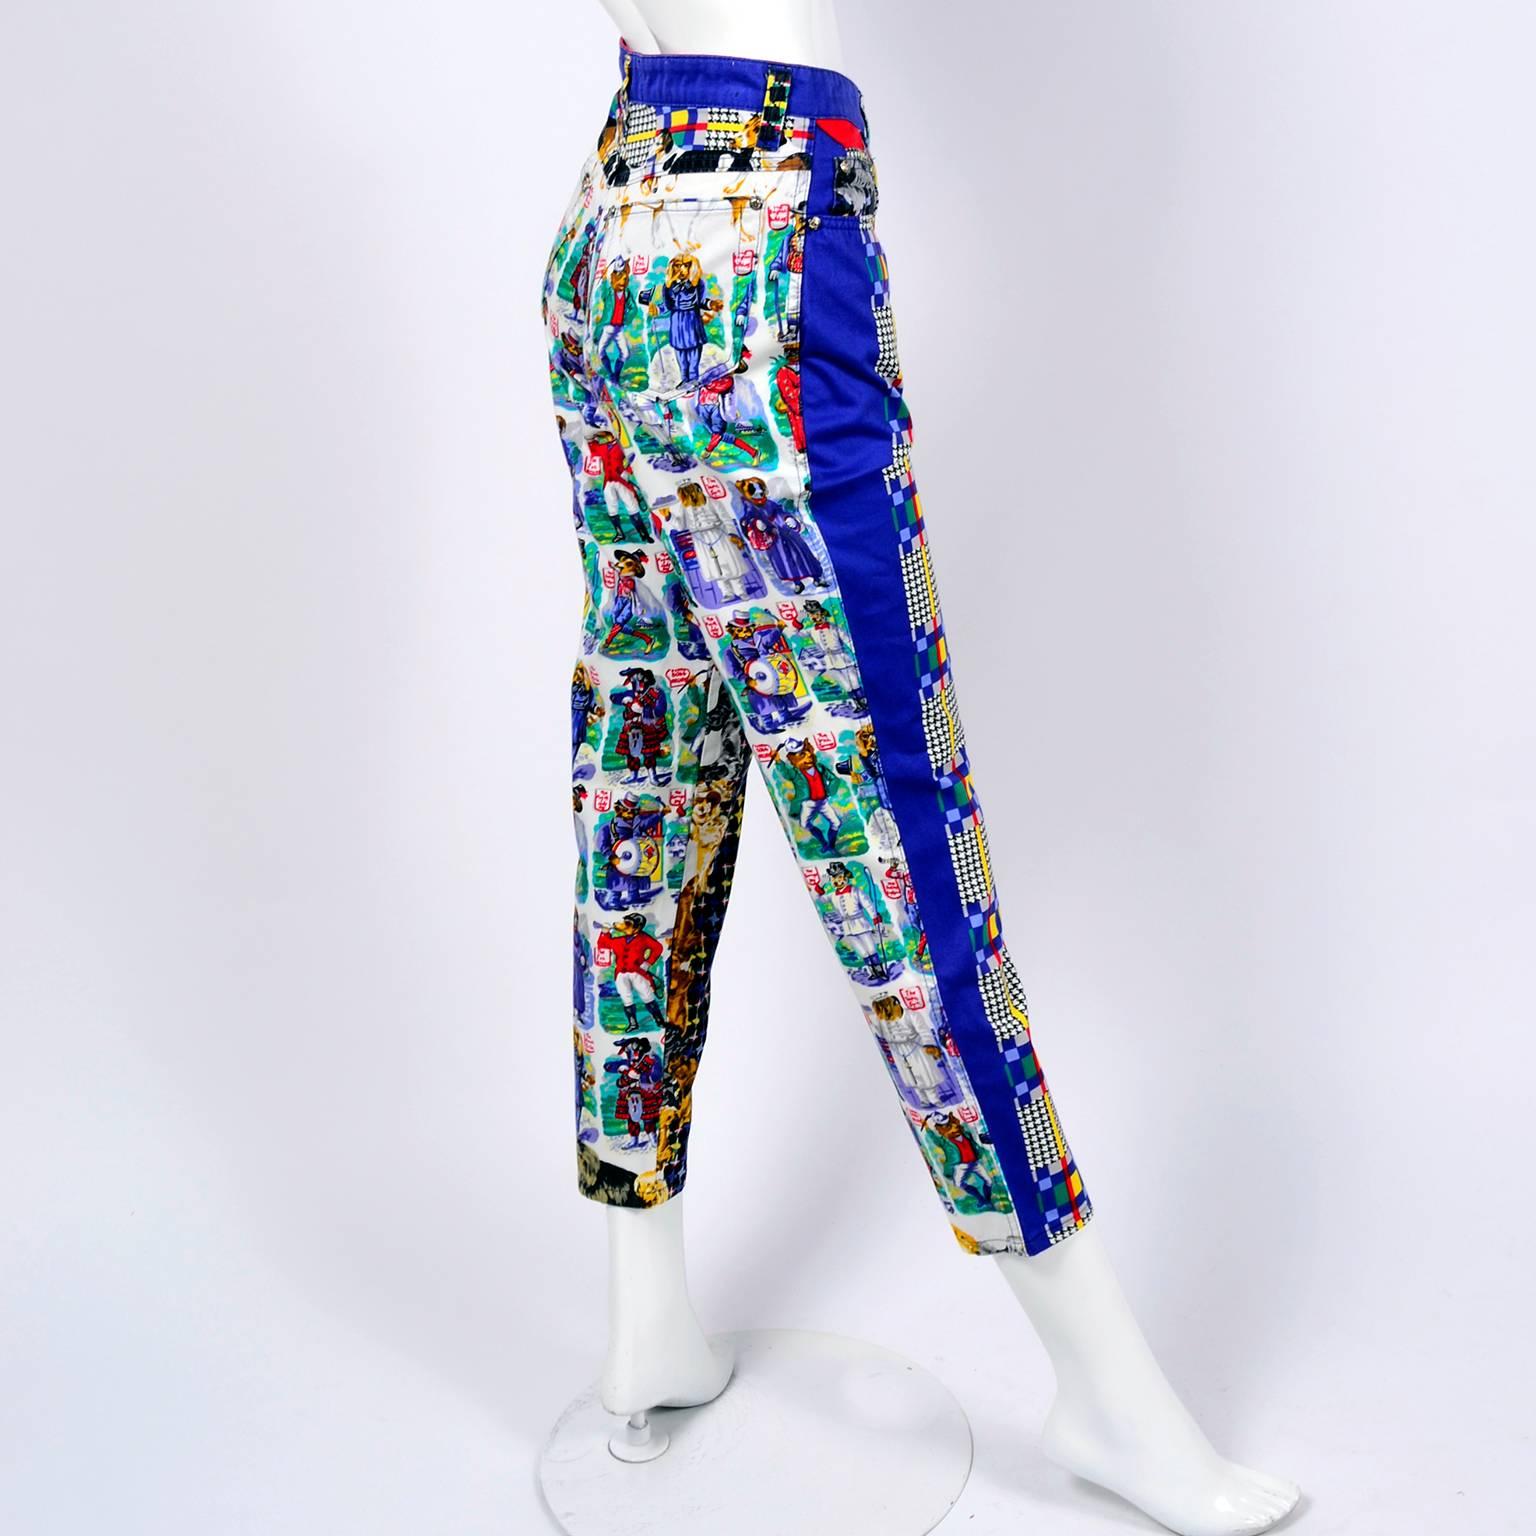 Gianni Versace Couture Houndstooth Plaid Dressed Dogs Novelty Print Jeans, 1990s 7